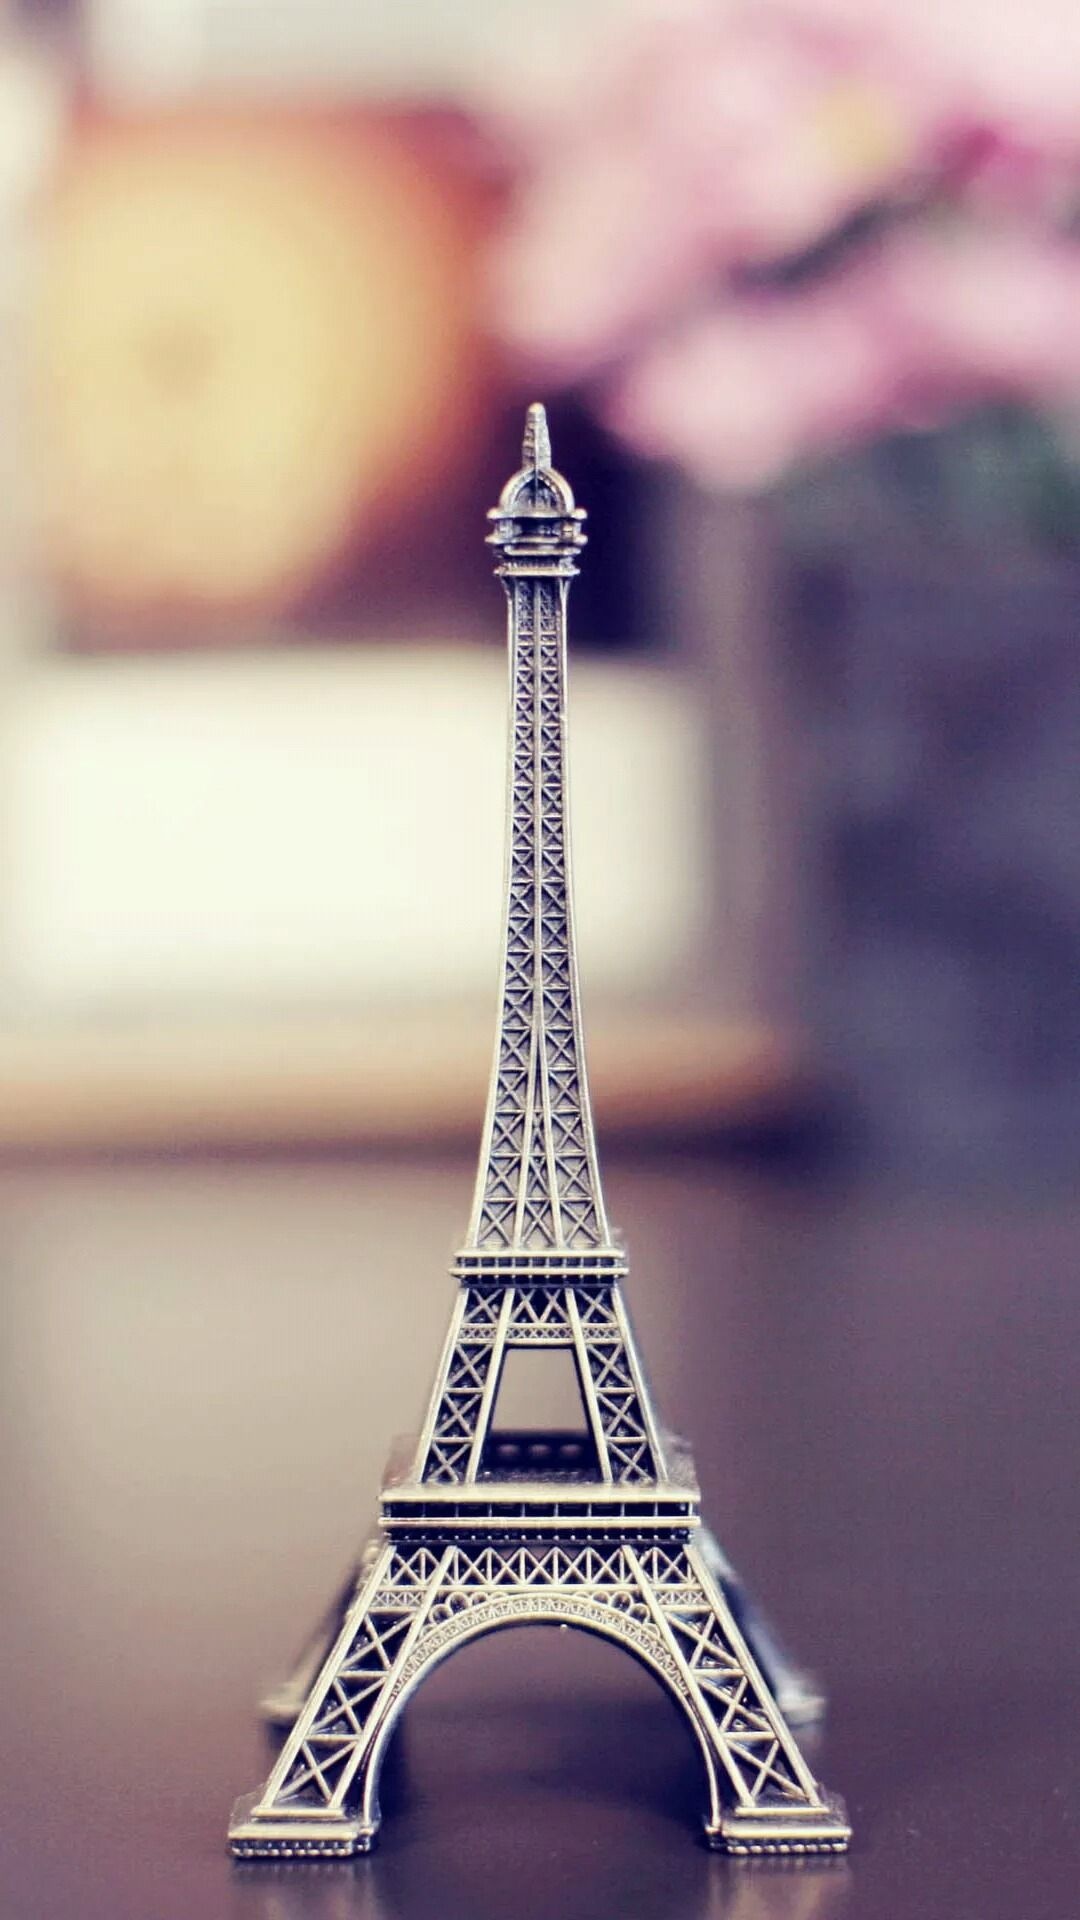 Paris: Eiffel Tower, A symbol of France, Architecture. 1080x1920 Full HD Background.